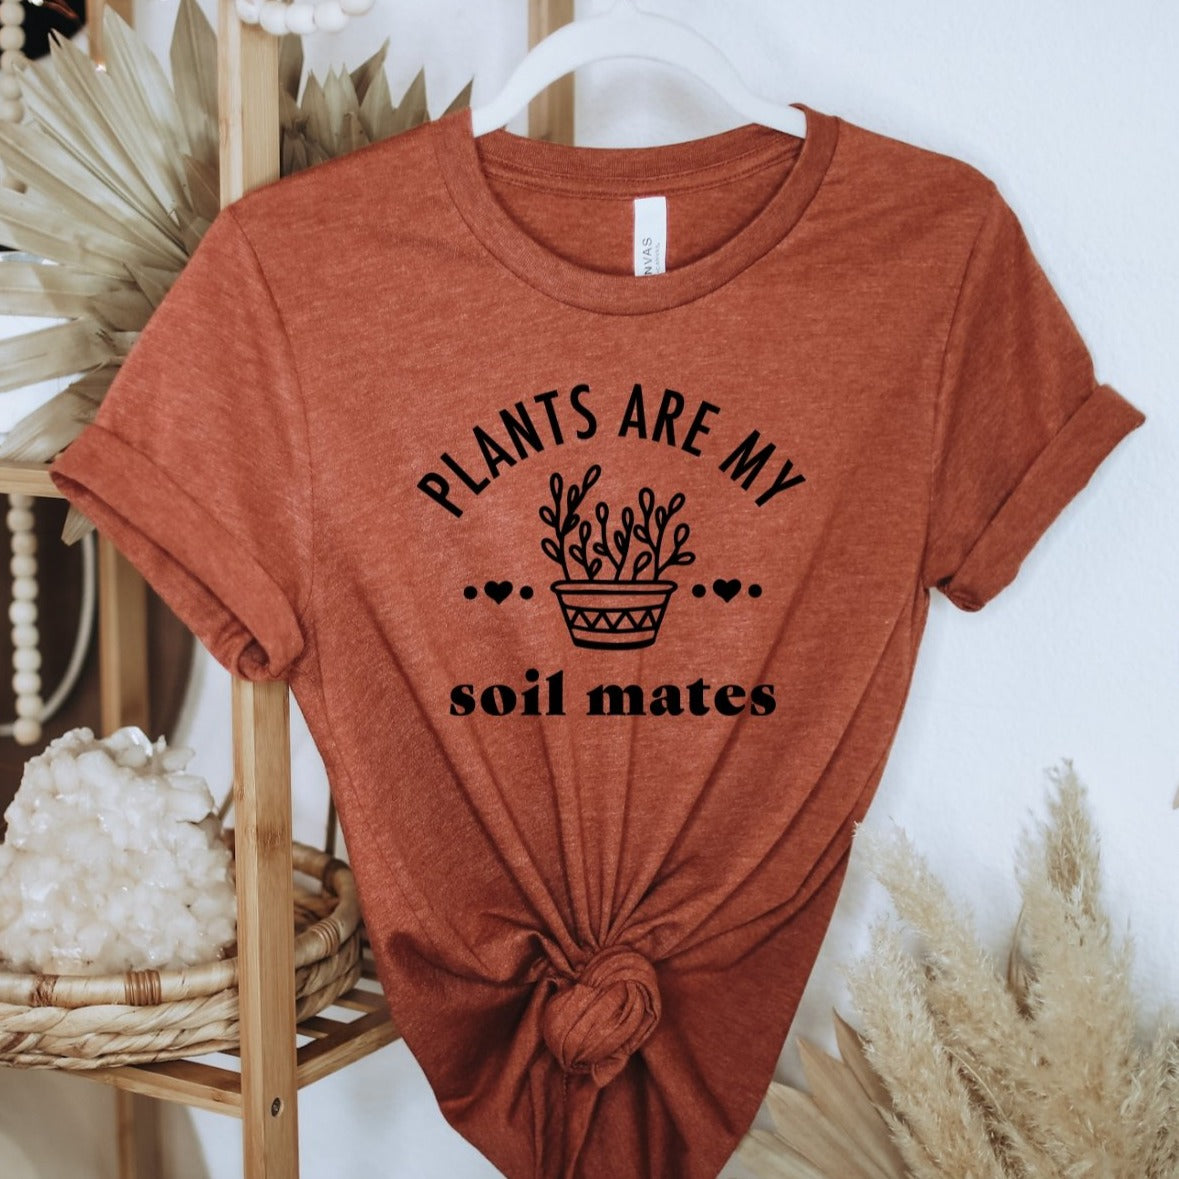 Plants are my Soil Mates